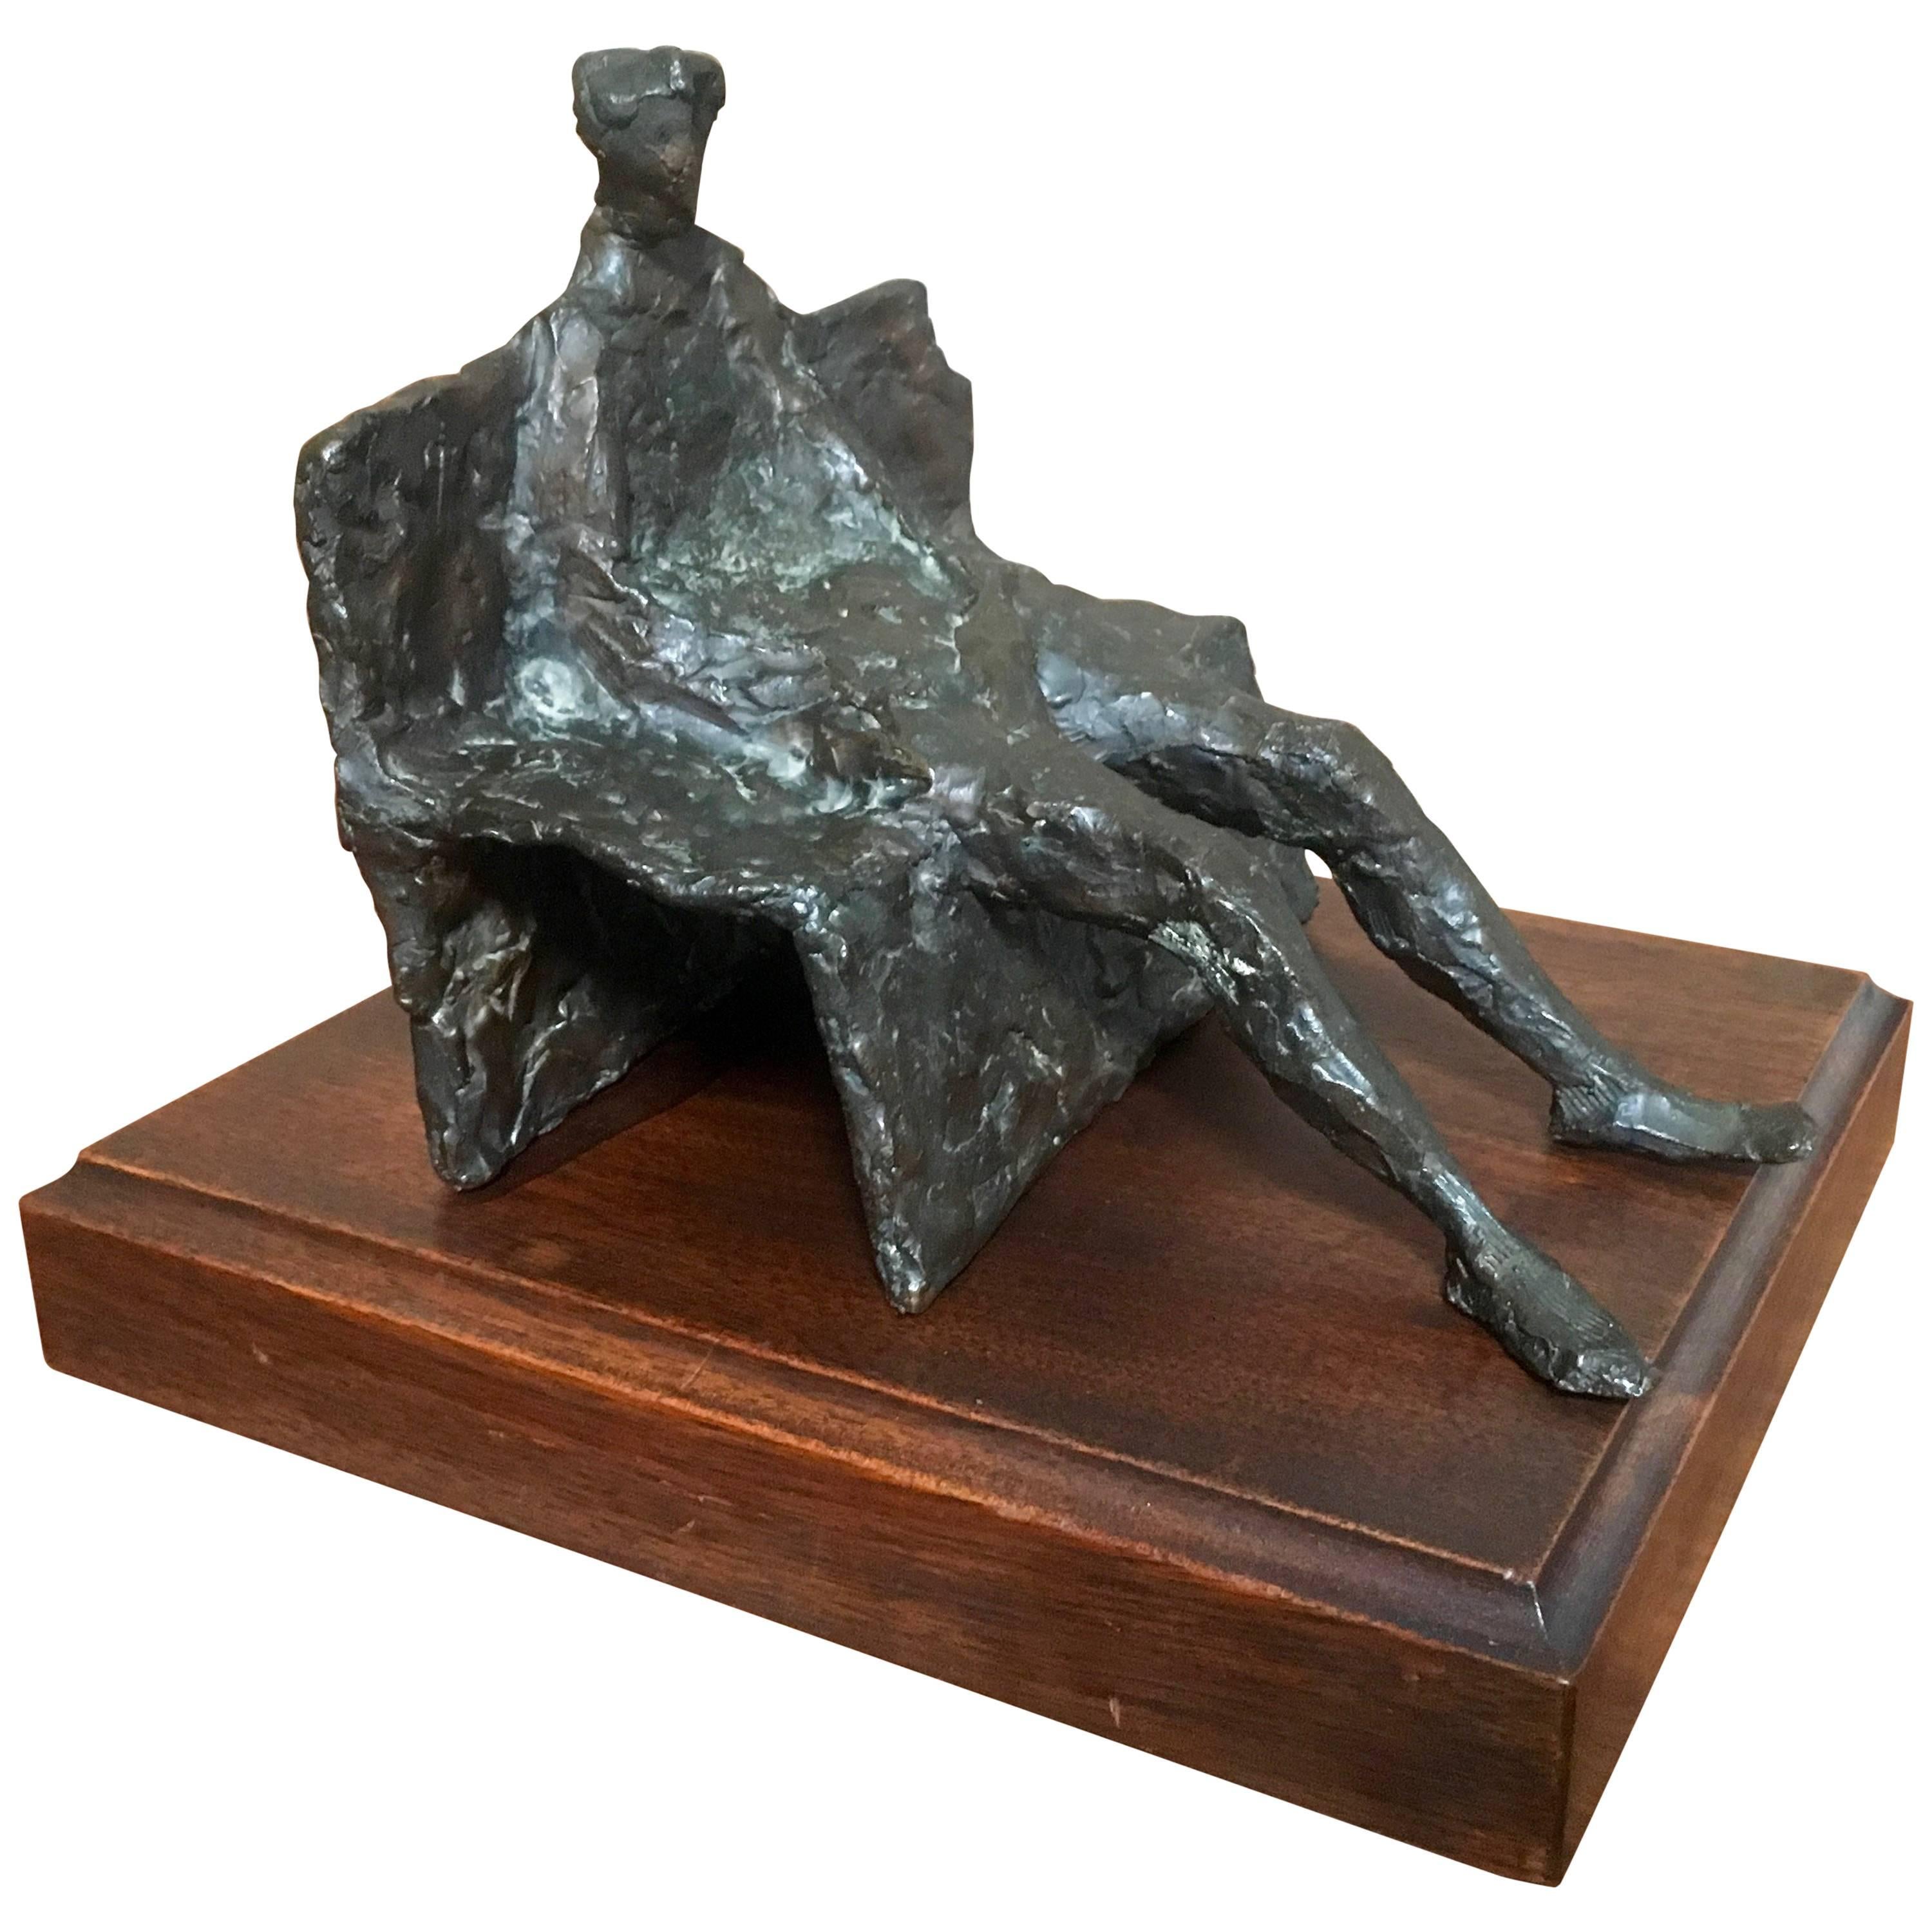 Abstract Bronze Sculpture of Man on a Bench